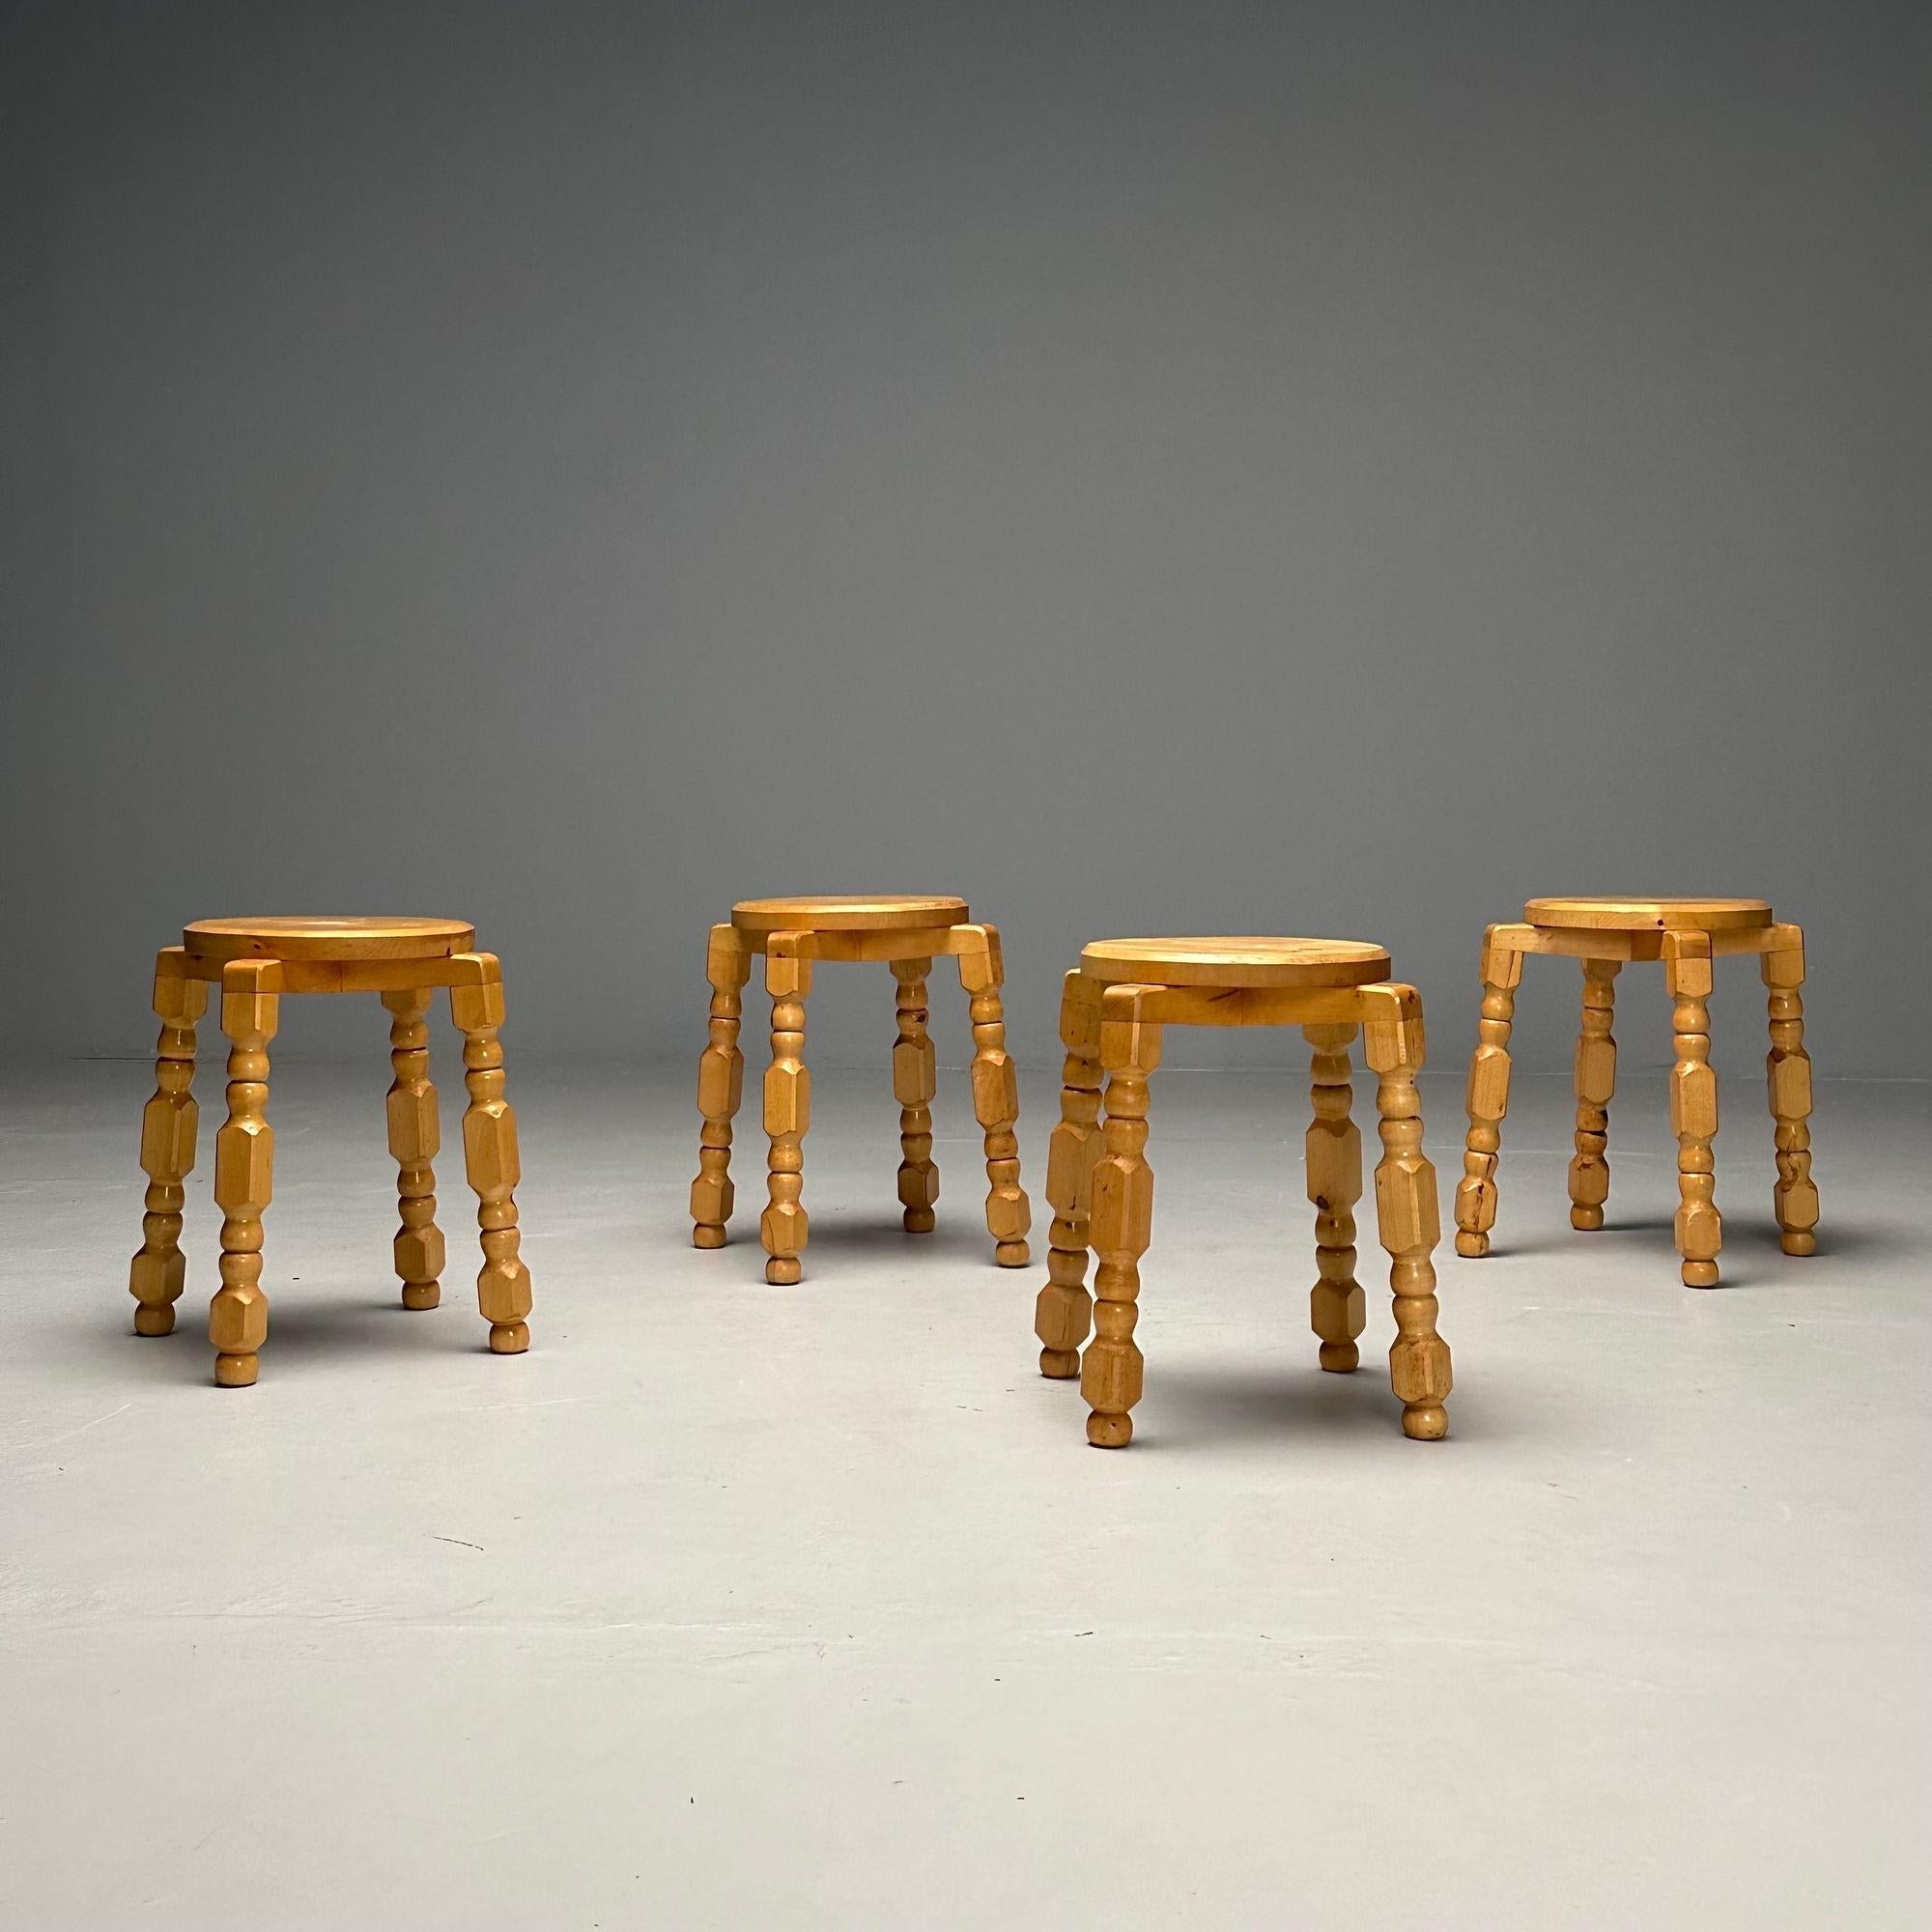 Swedish Mid-Century Modern, Two Footstools, Birch, Sweden, 1960s

Two birch stools designed and produced in Sweden in the later half of the 20th century. Each stool has four playfully carved slightly tilted legs. Wood doweling throughout indicative